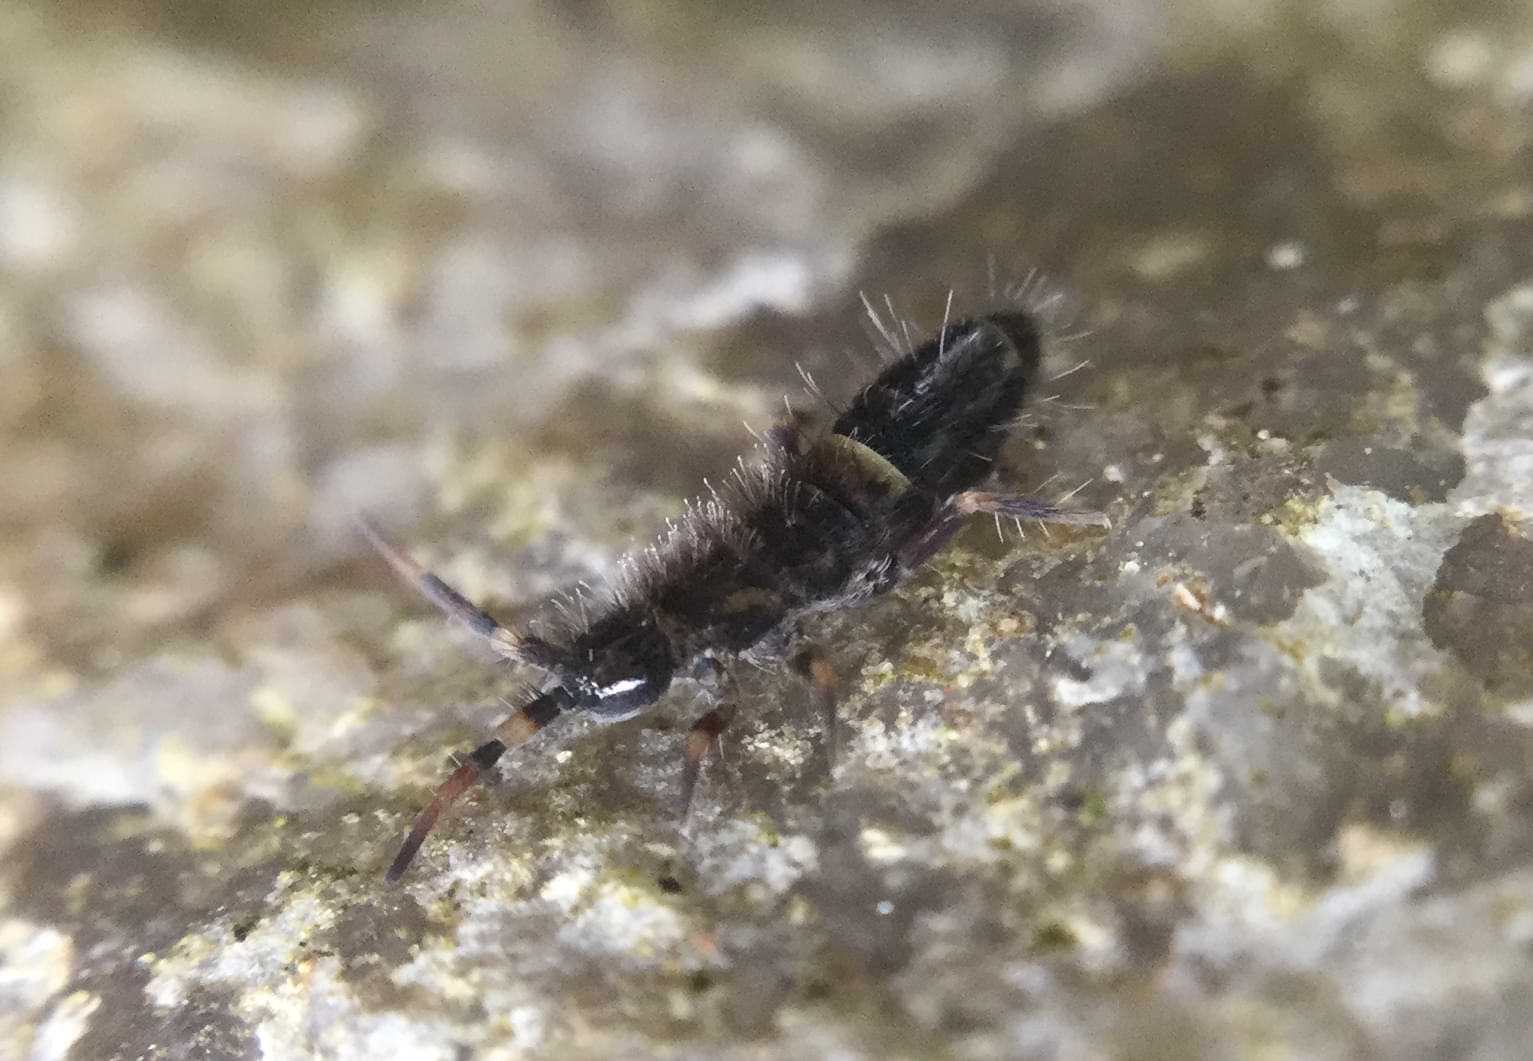 A close up image of a hairy black springtail. It has light-brown coloured bands running around its body and limbs.